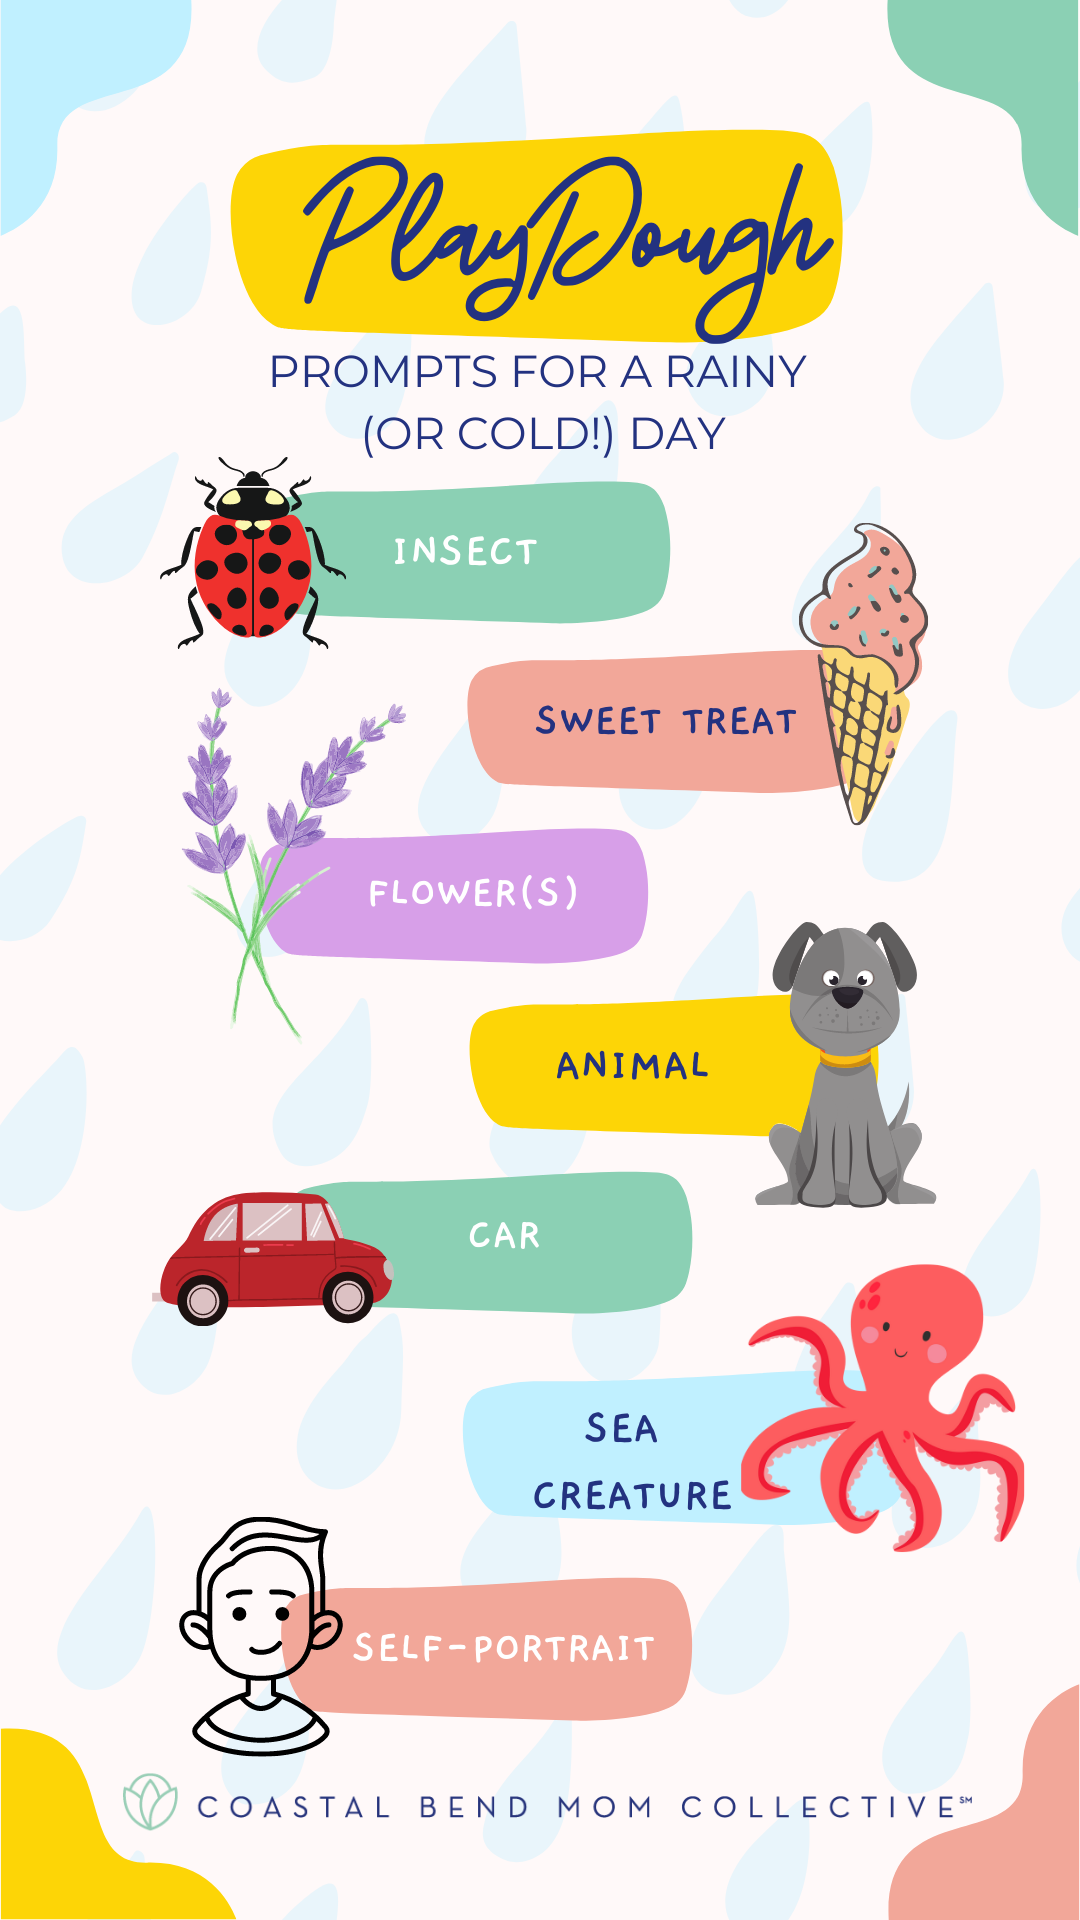 PlayDough Prompts for a Rainy or Cold Day